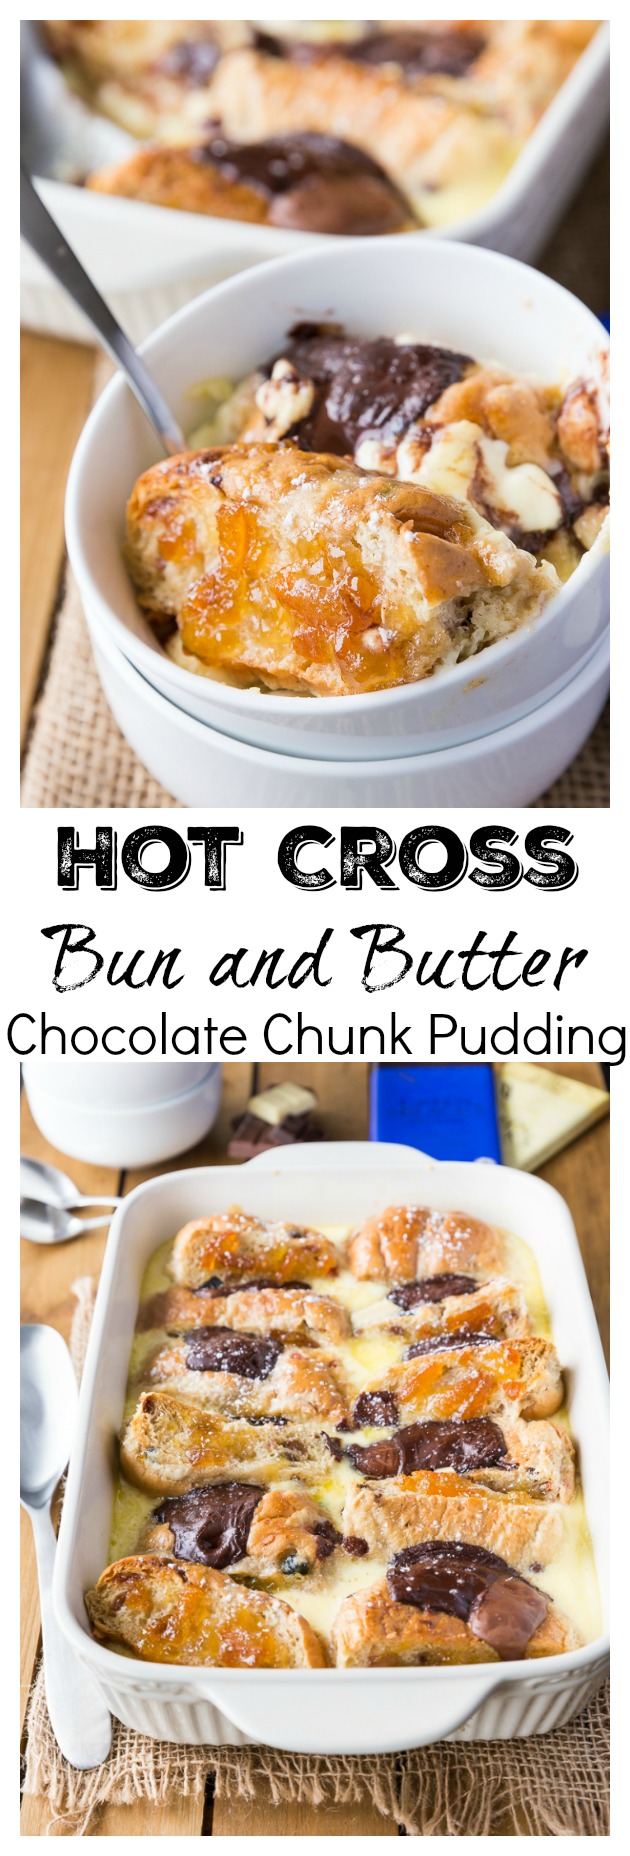 This decadent Hot Cross Bun Bread &amp; Butter Pudding is perfect for an Easter dessert, or even a super decadent breakfast! A classic UK recipe made better with chocolate!